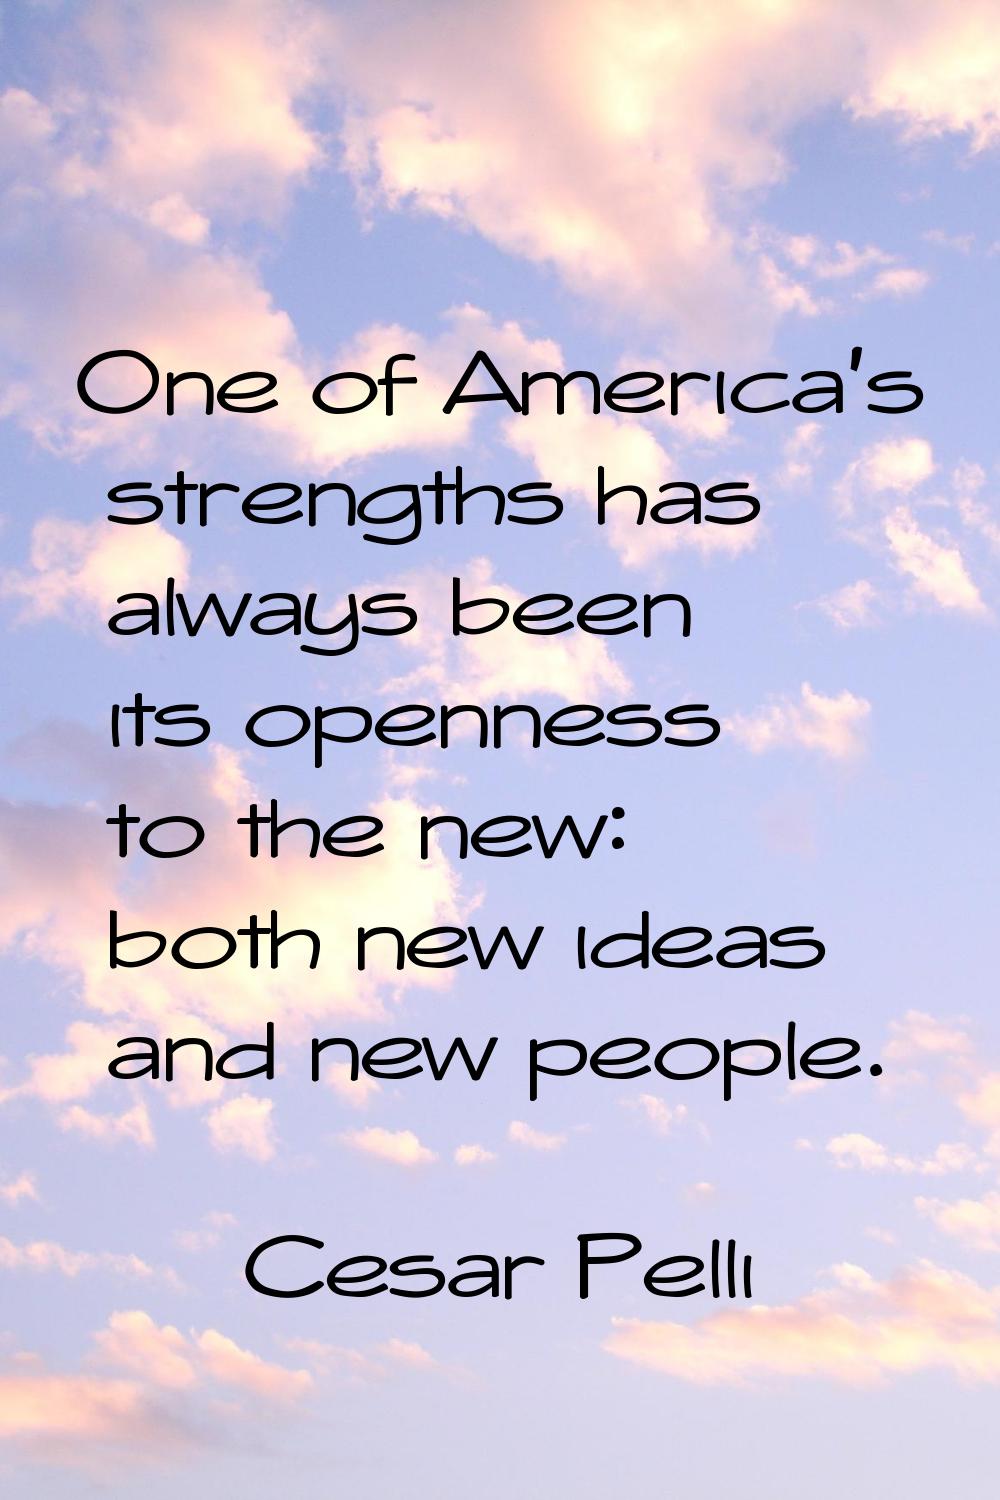 One of America's strengths has always been its openness to the new: both new ideas and new people.